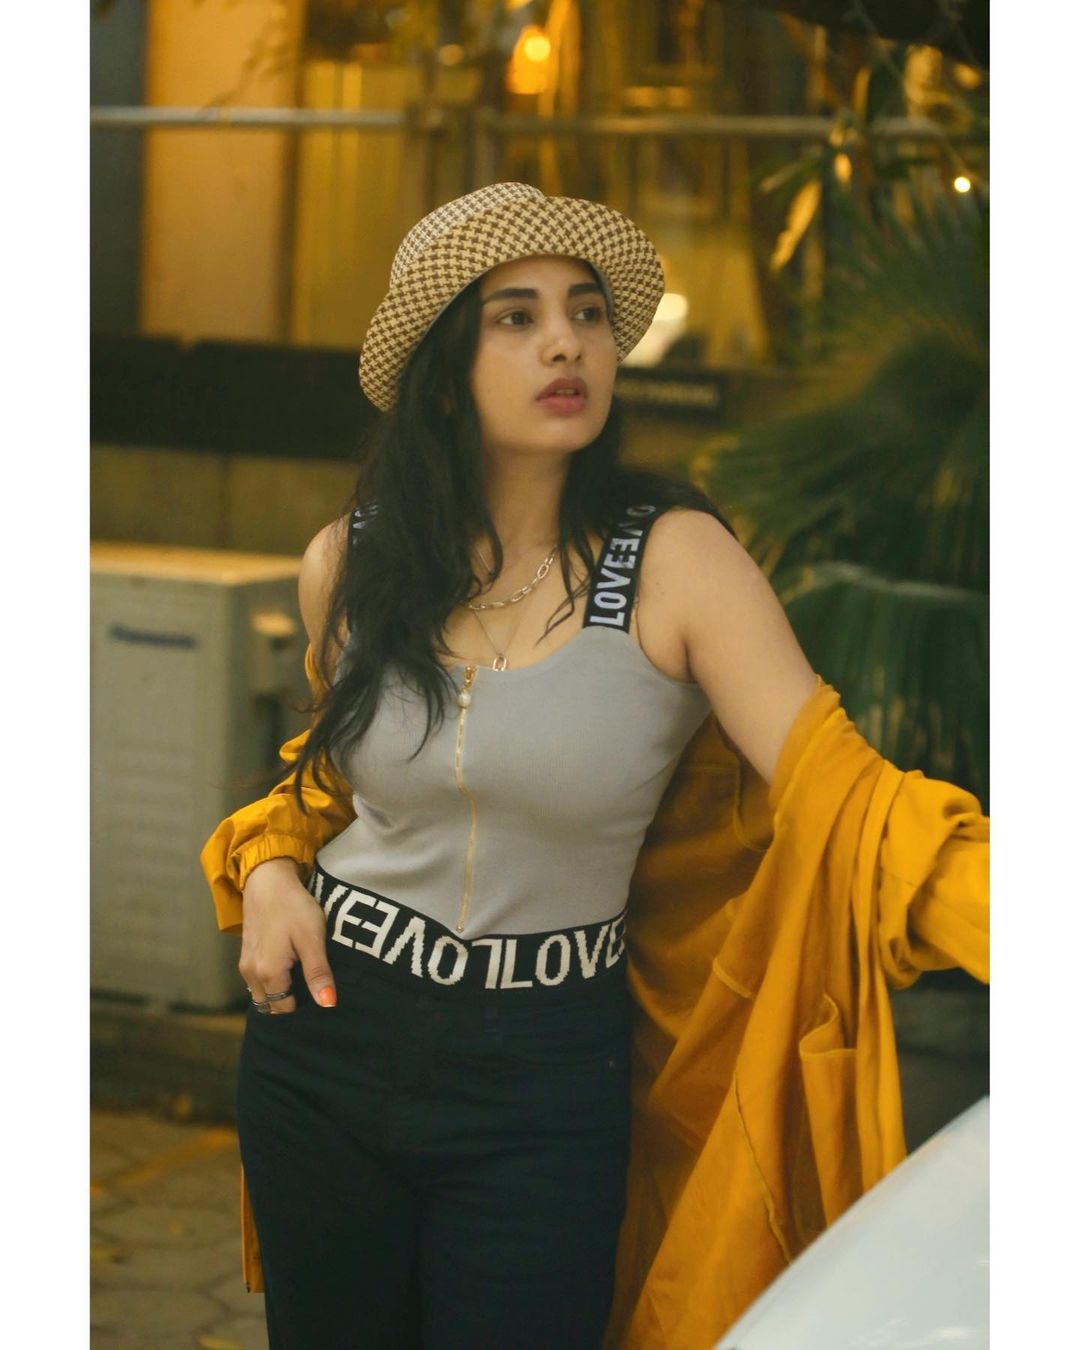 actress srushti dange hot photos and video getting viral on social media